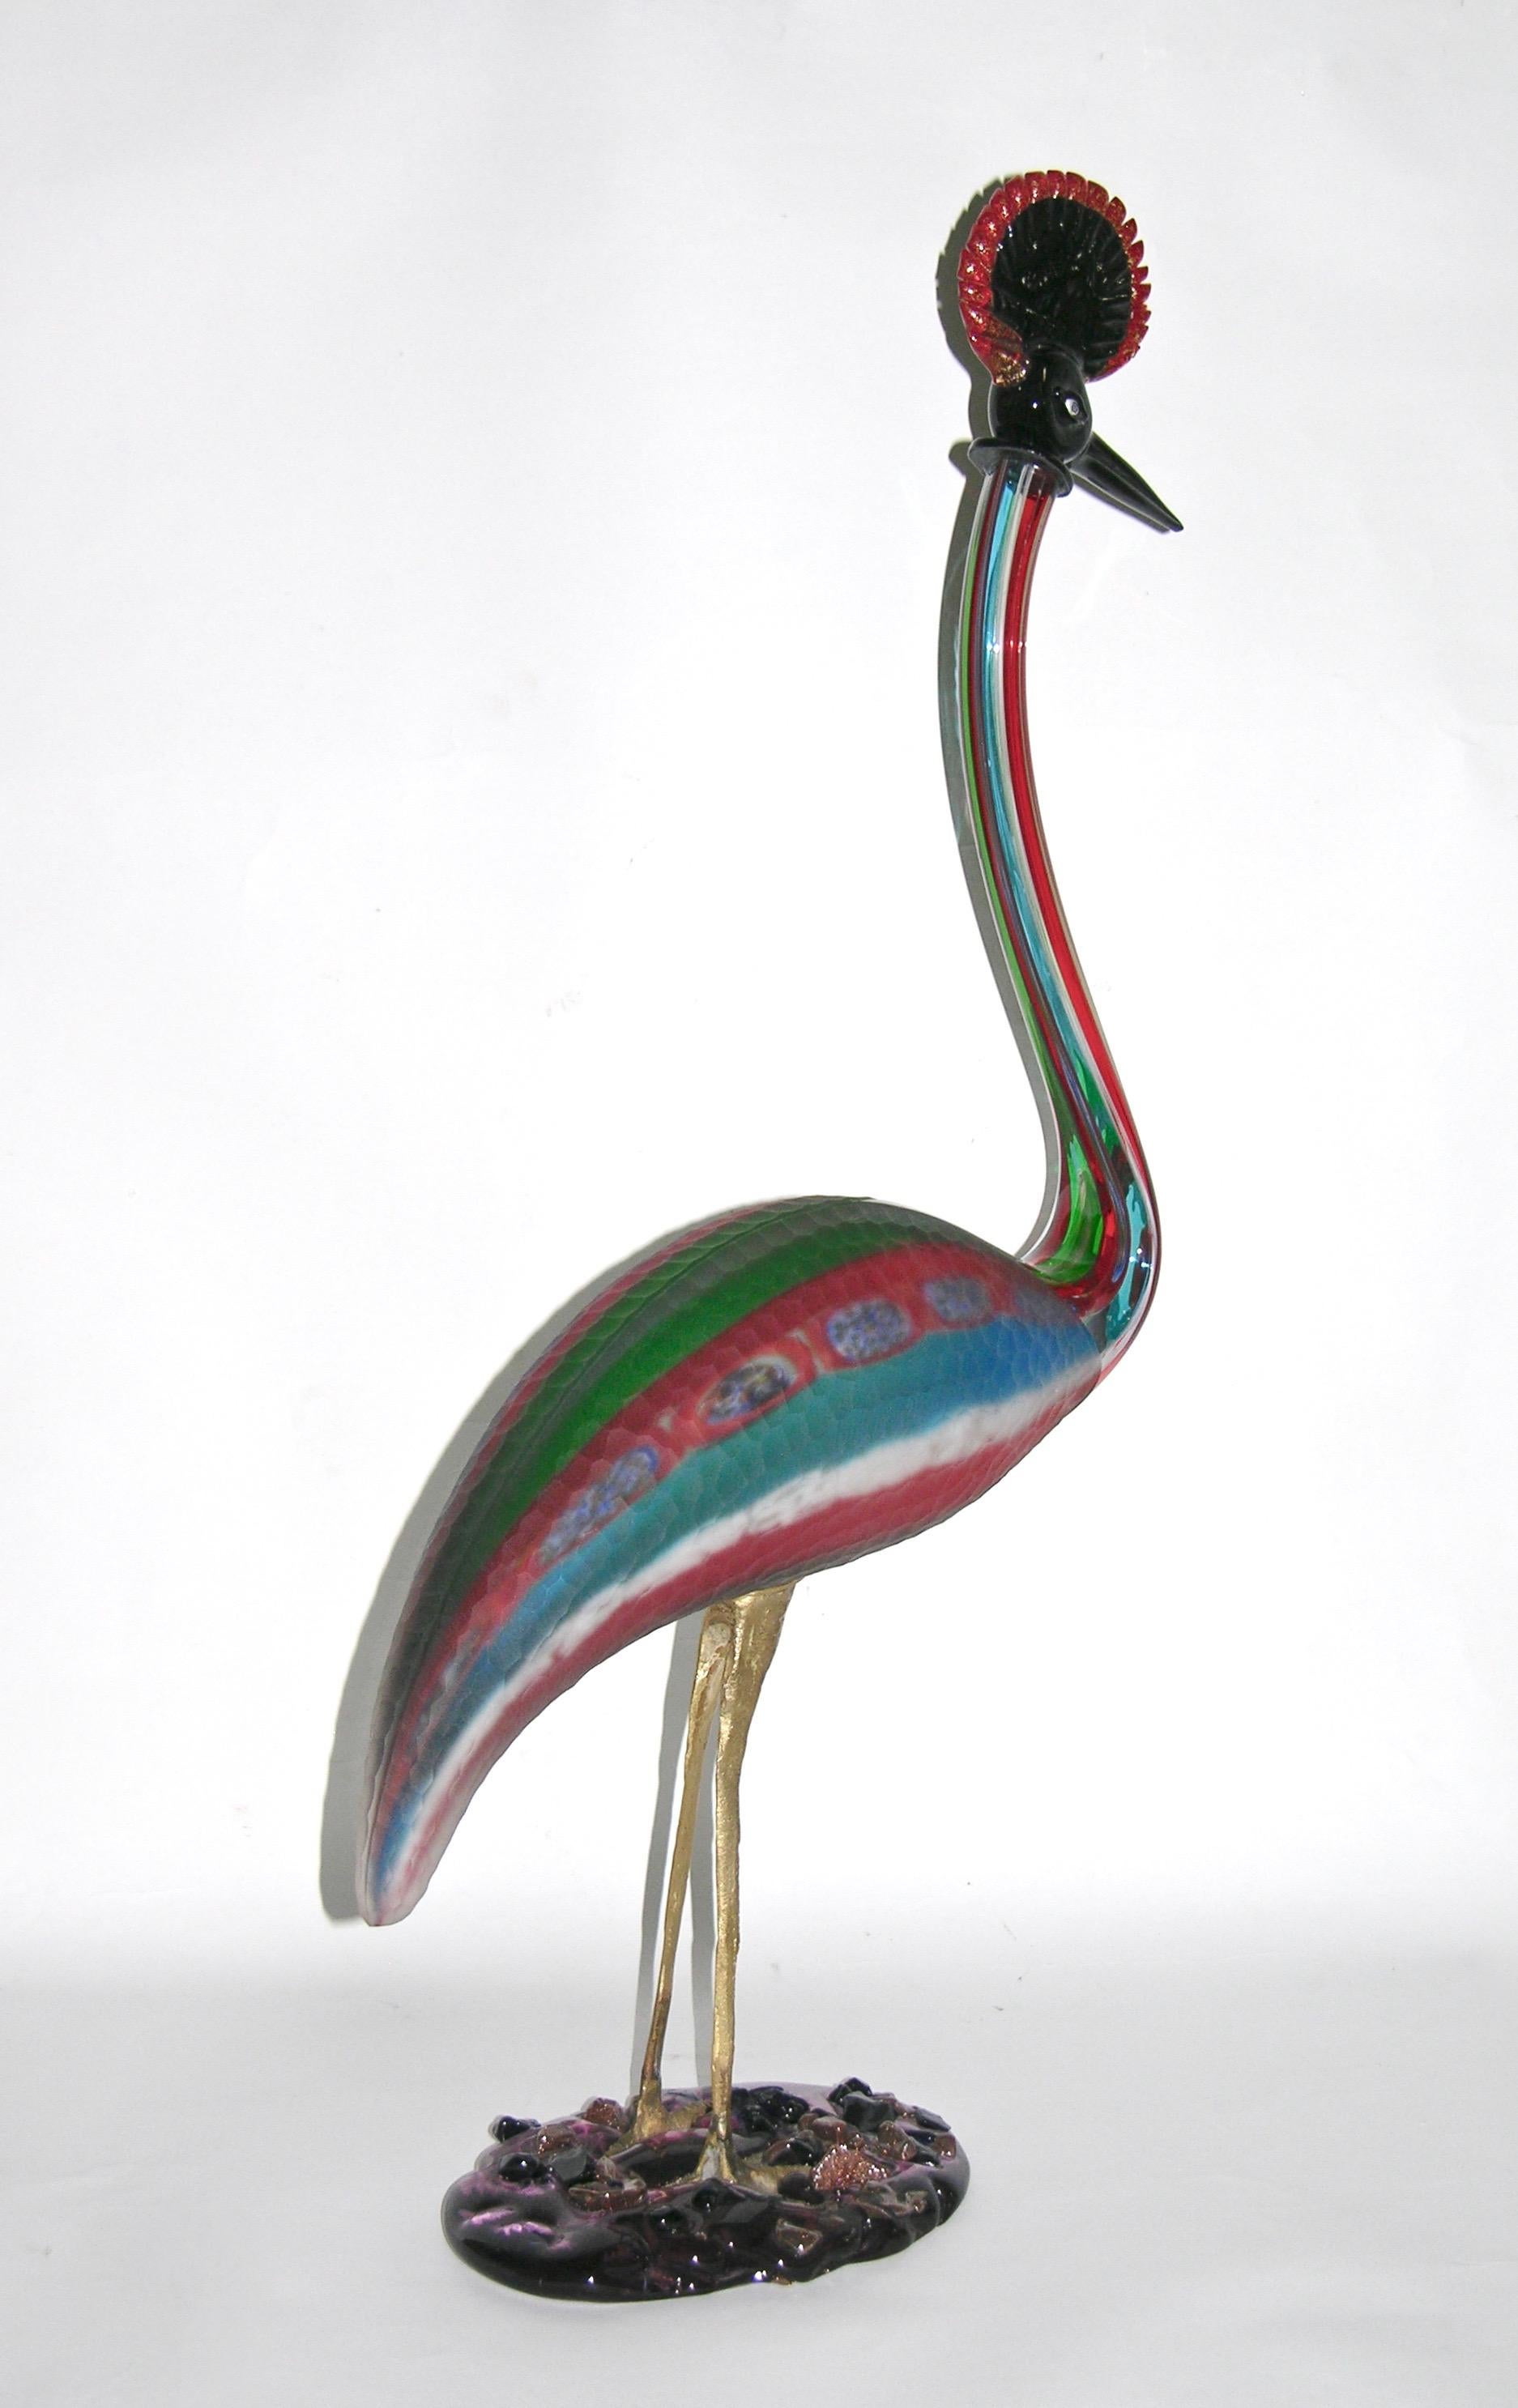 This very expressive crested crane art glass sculpture, from the 1970s, is a true jewel-like work of art, in sophisticated blown Murano glass, with overlaid stripes decor in red, white, blue and green, with inserted multi colored murrine and part of